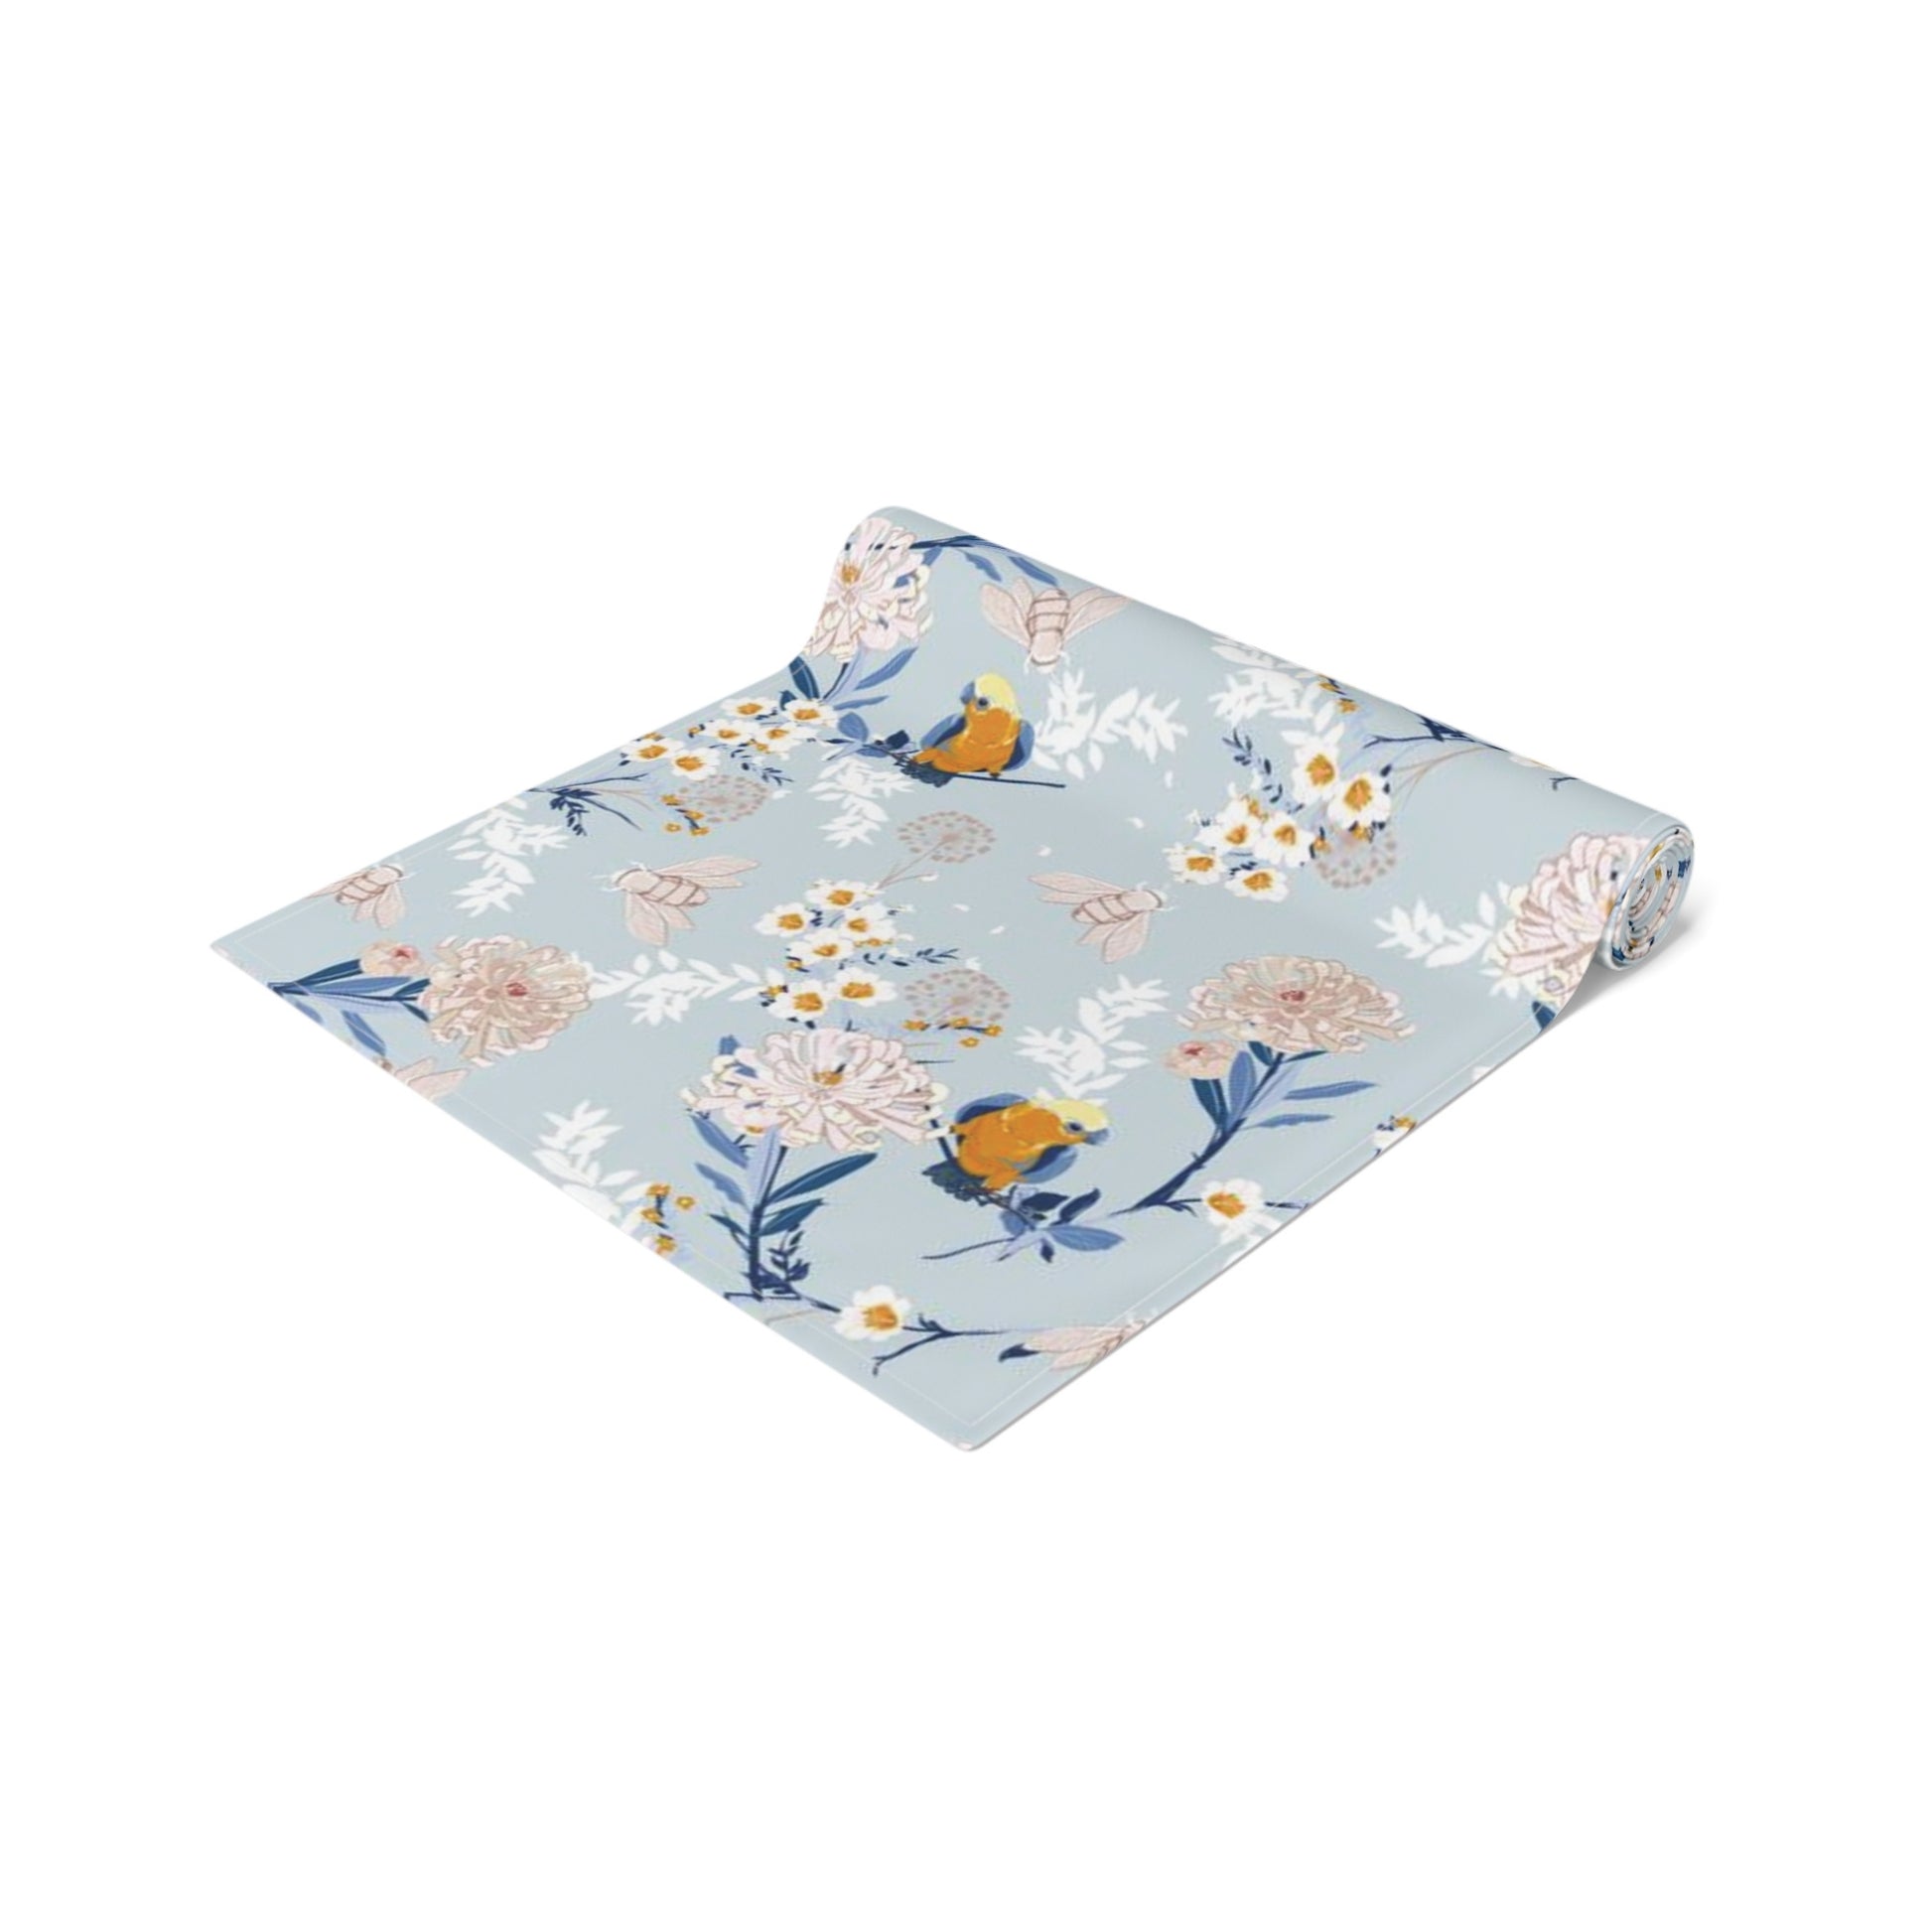 a blue and white floral napkin with a bird on it